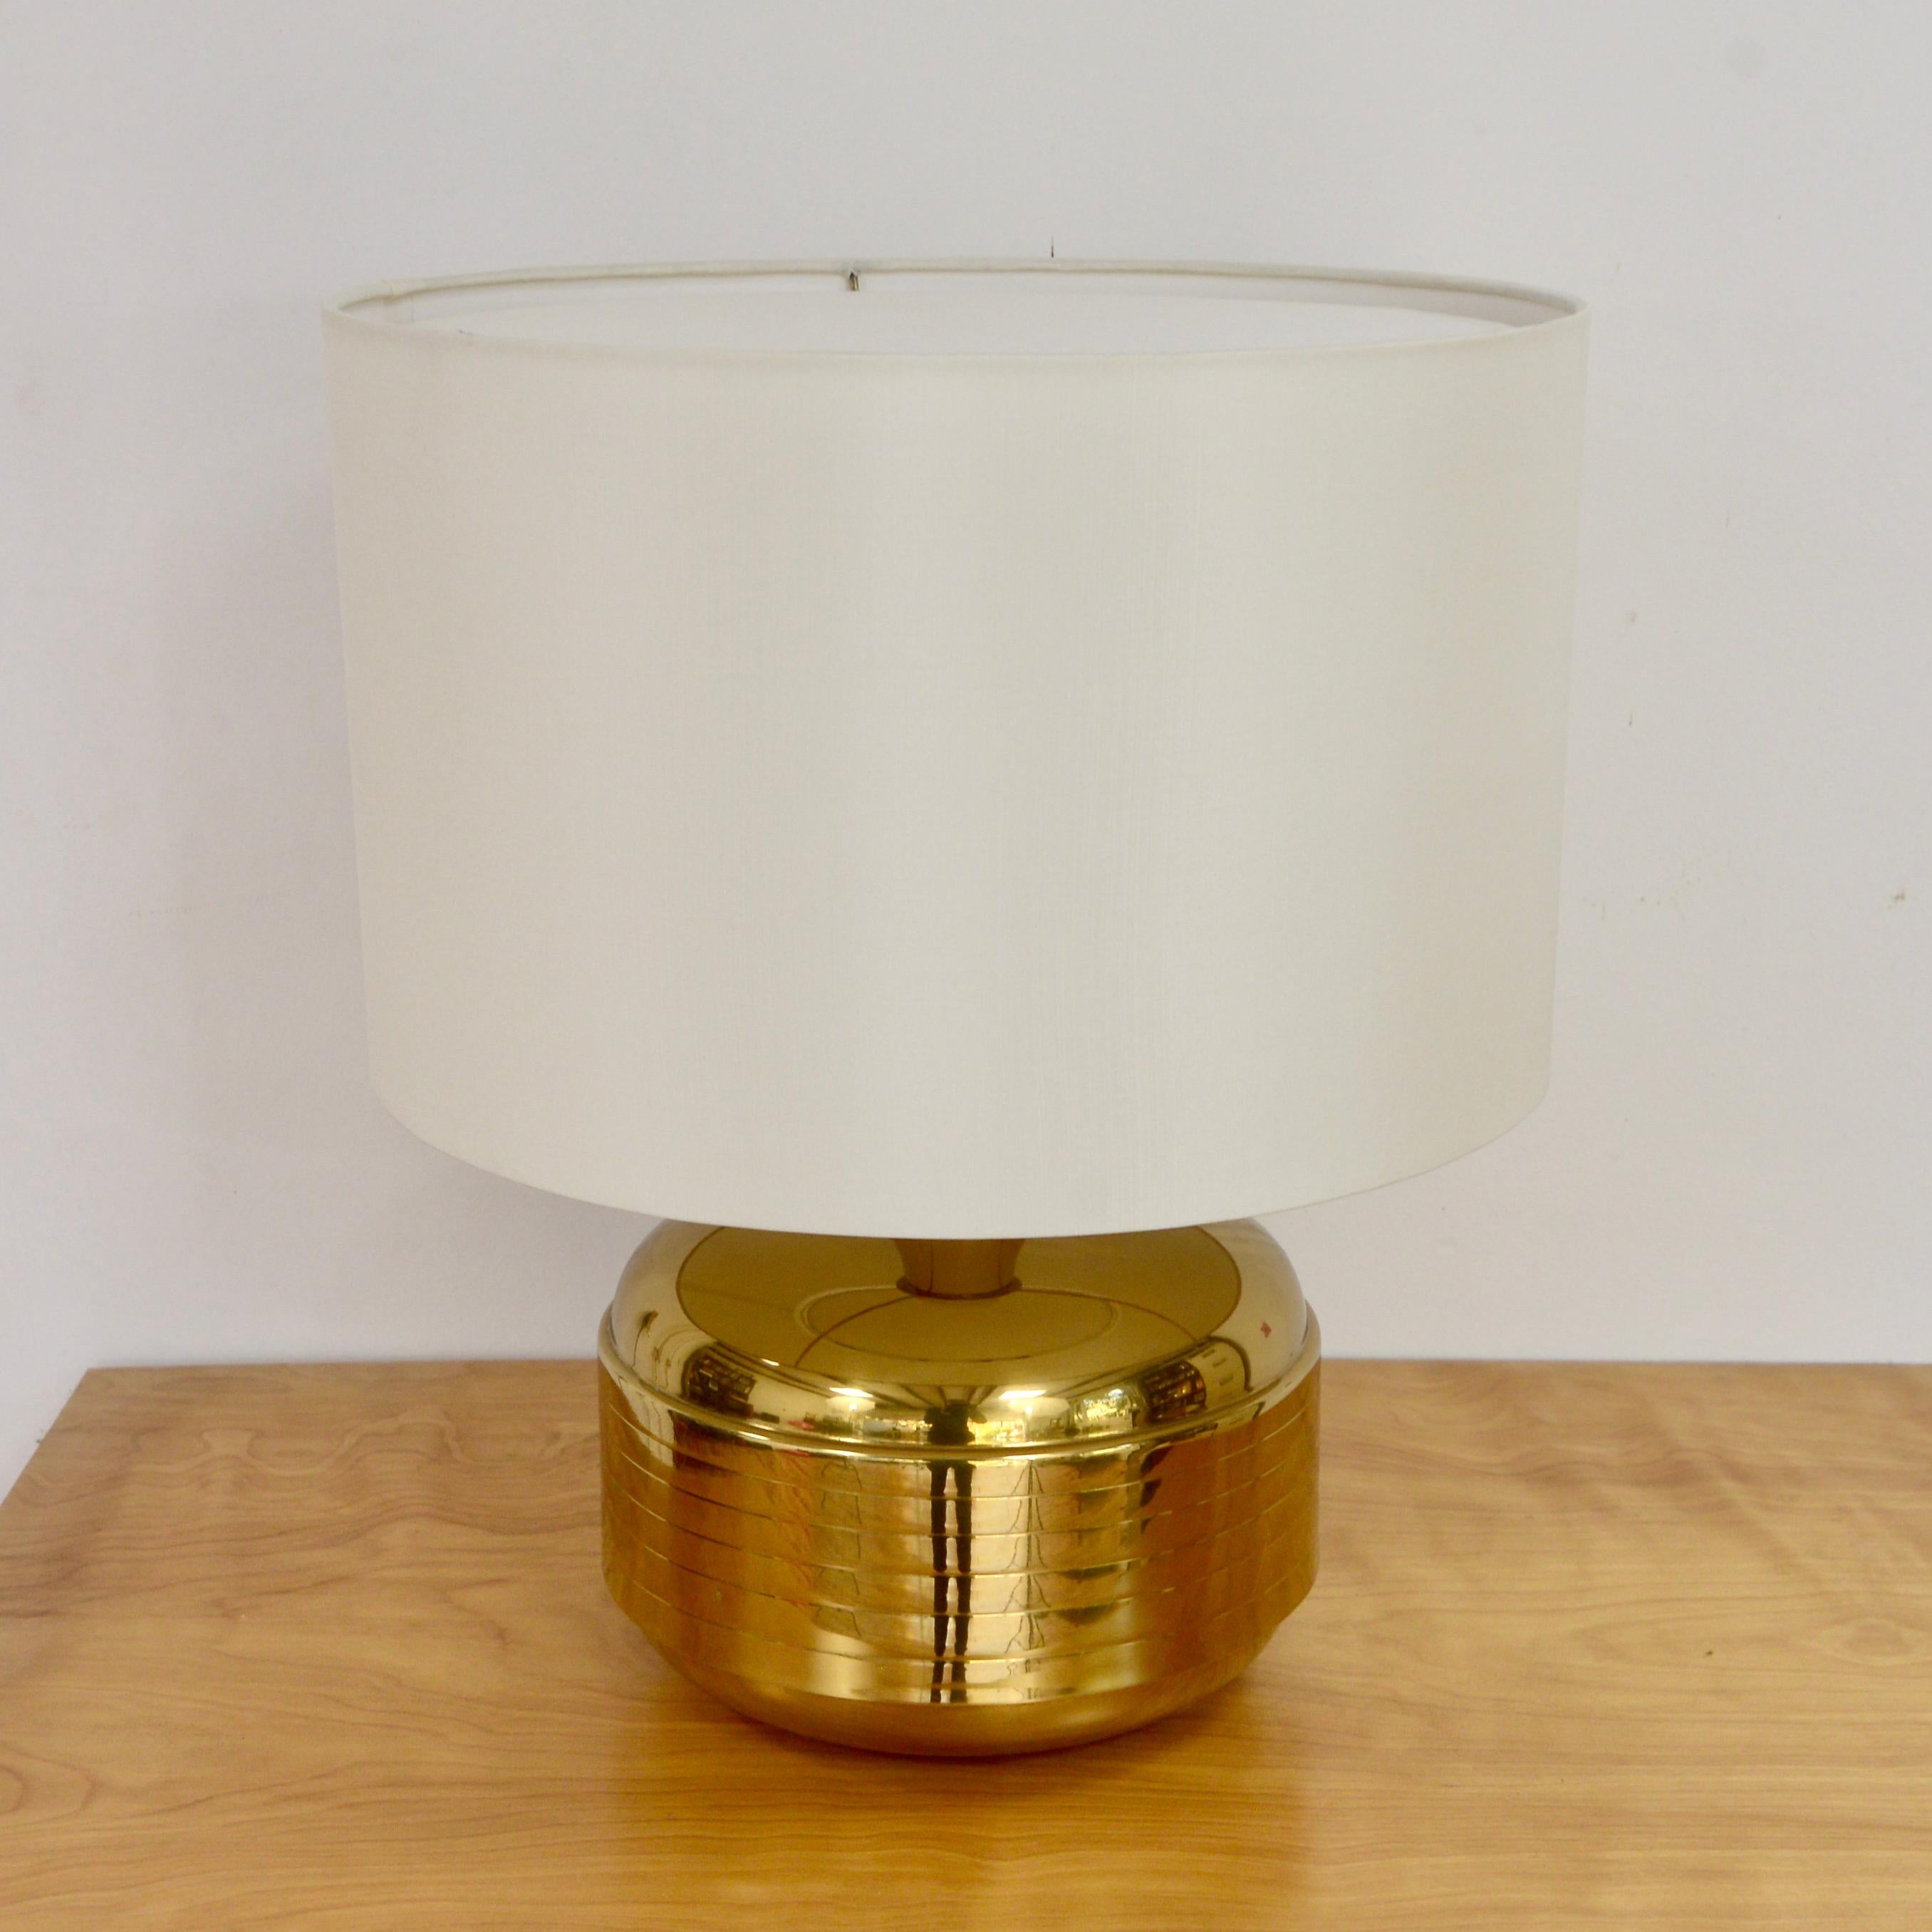 Fully restored 1960s brass Italian table lamp. Elegant and golden toned solid broad lamp base with a linear pattern. Rewired with a single E26 medium based socket, ready to be used in the USA. 
Measurements:
Height: 16”
Shade Diameter: 19”
Base